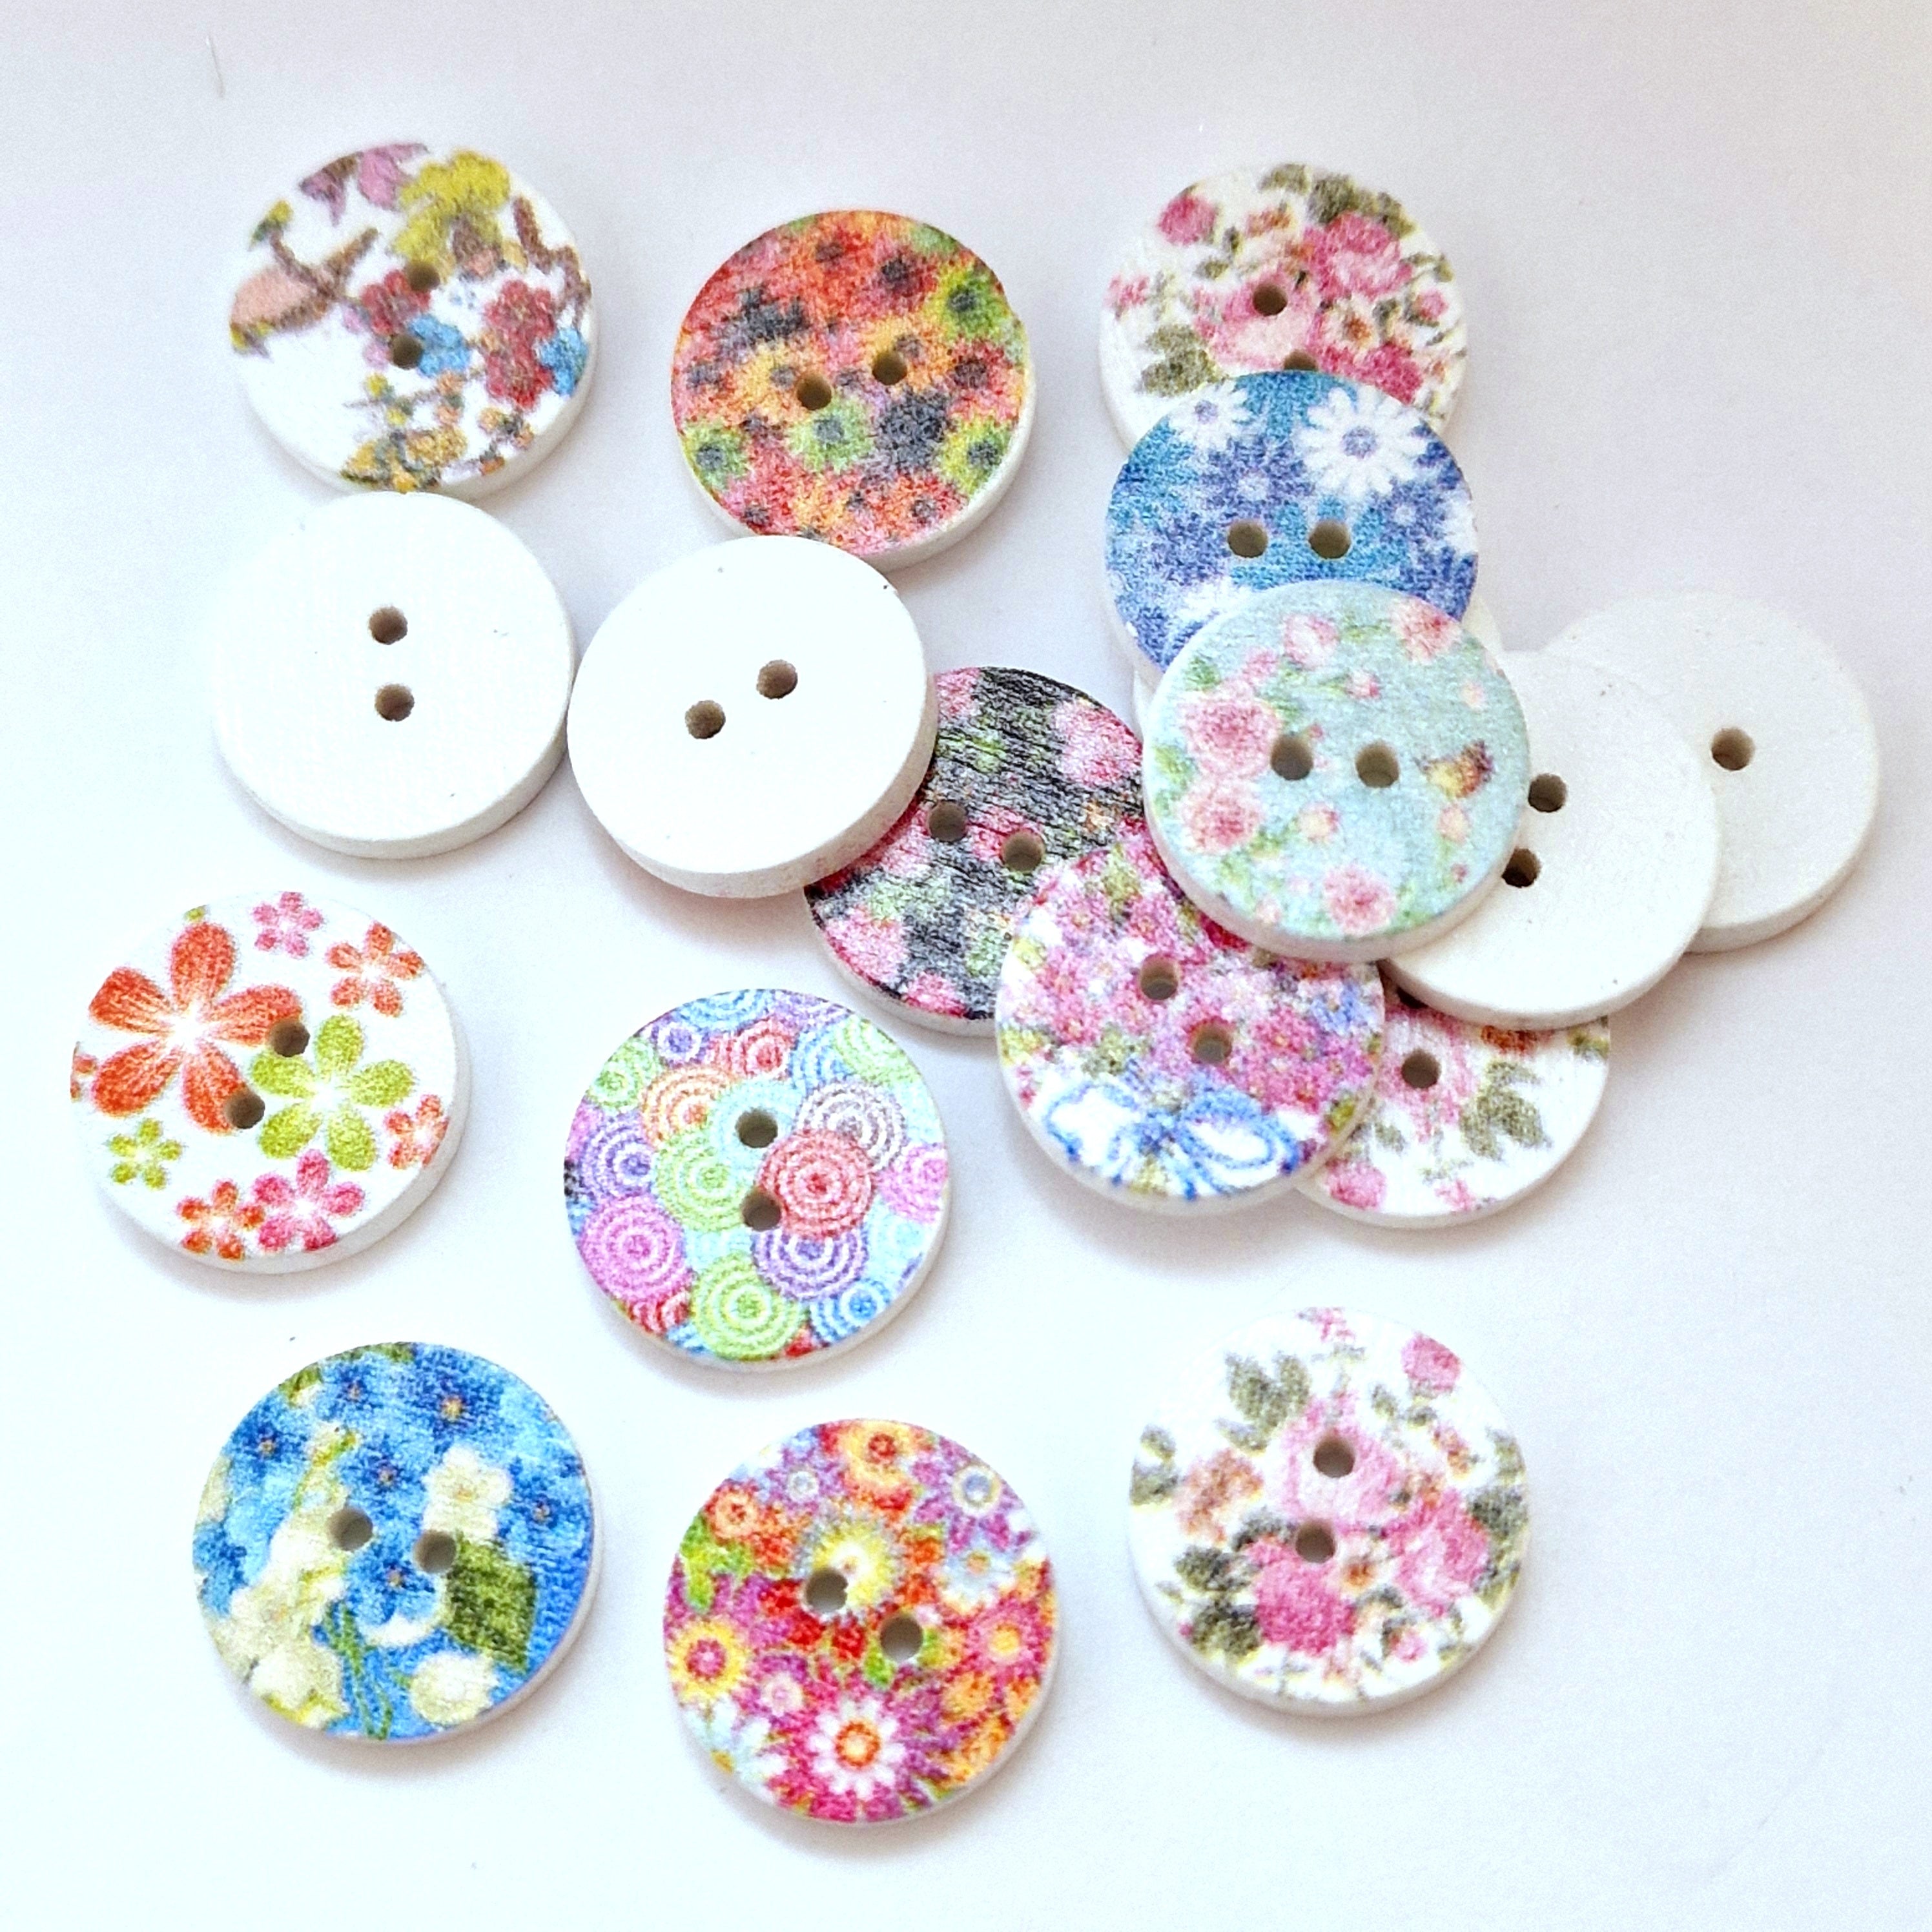 MajorCrafts 48pcs 15mm Mixed Flower Pattern 2 Holes Round Wood Sewing Buttons